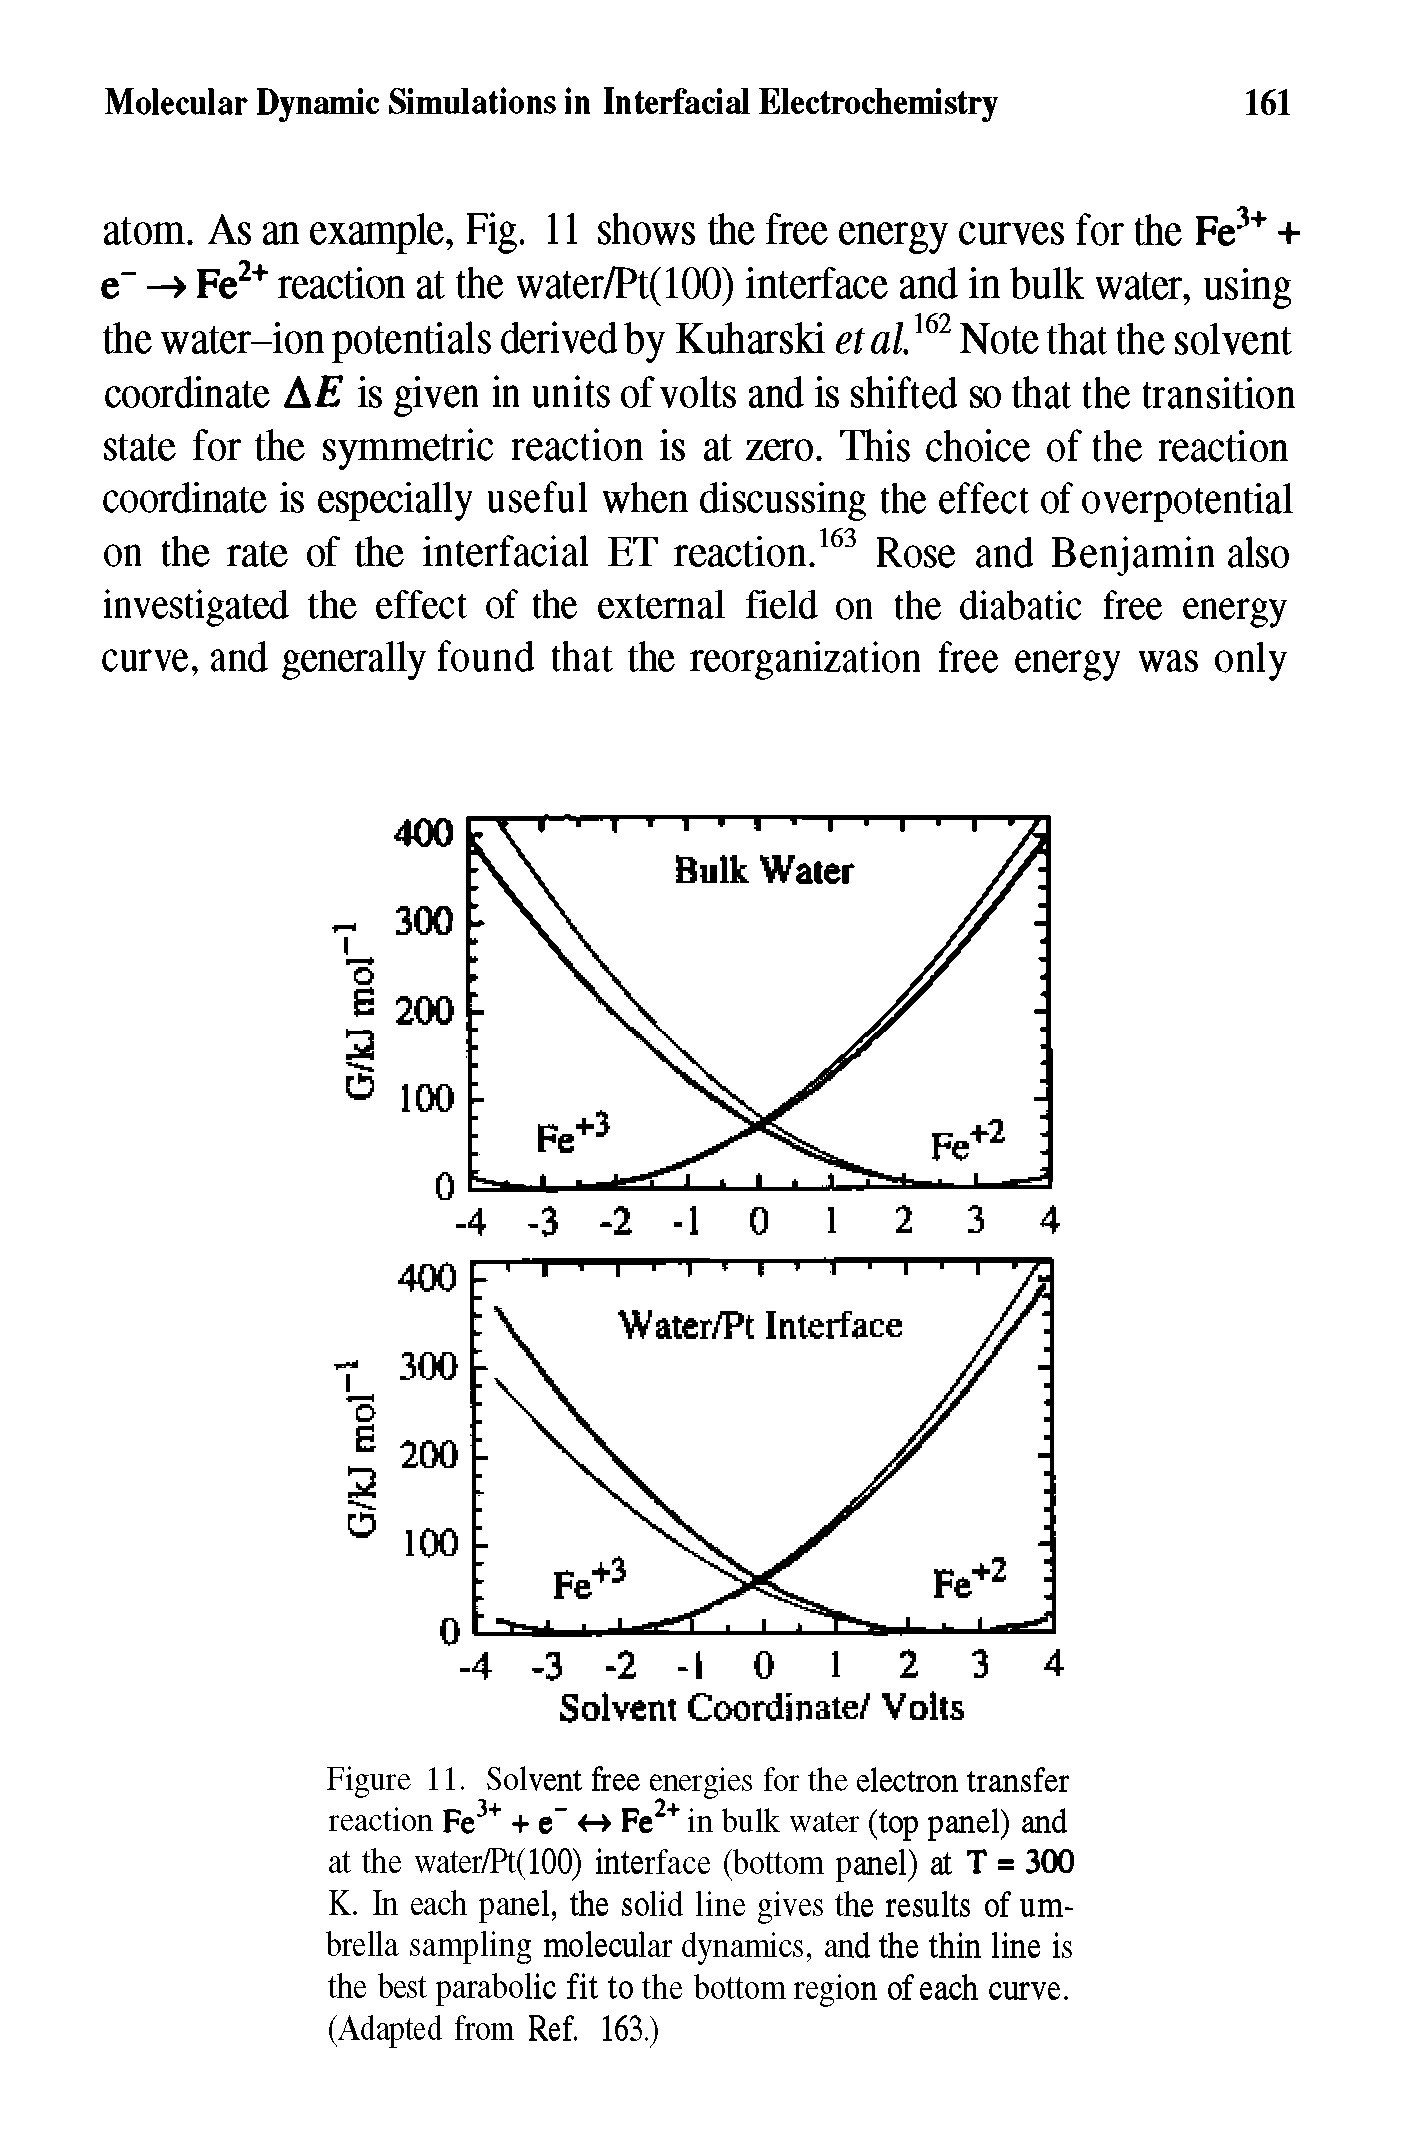 Figure 11. Solvent free energies for the electron transfer reaction Fe + e <- Fe in bulk water (top panel) and at the water/Pt(100) interface (bottom panel) at T = 300 K. In each panel, the solid line gives the results of umbrella sampling molecular dynamics, and the thin line is the best parabolic fit to the bottom region of each curve. (Adapted from Ref. 163.)...